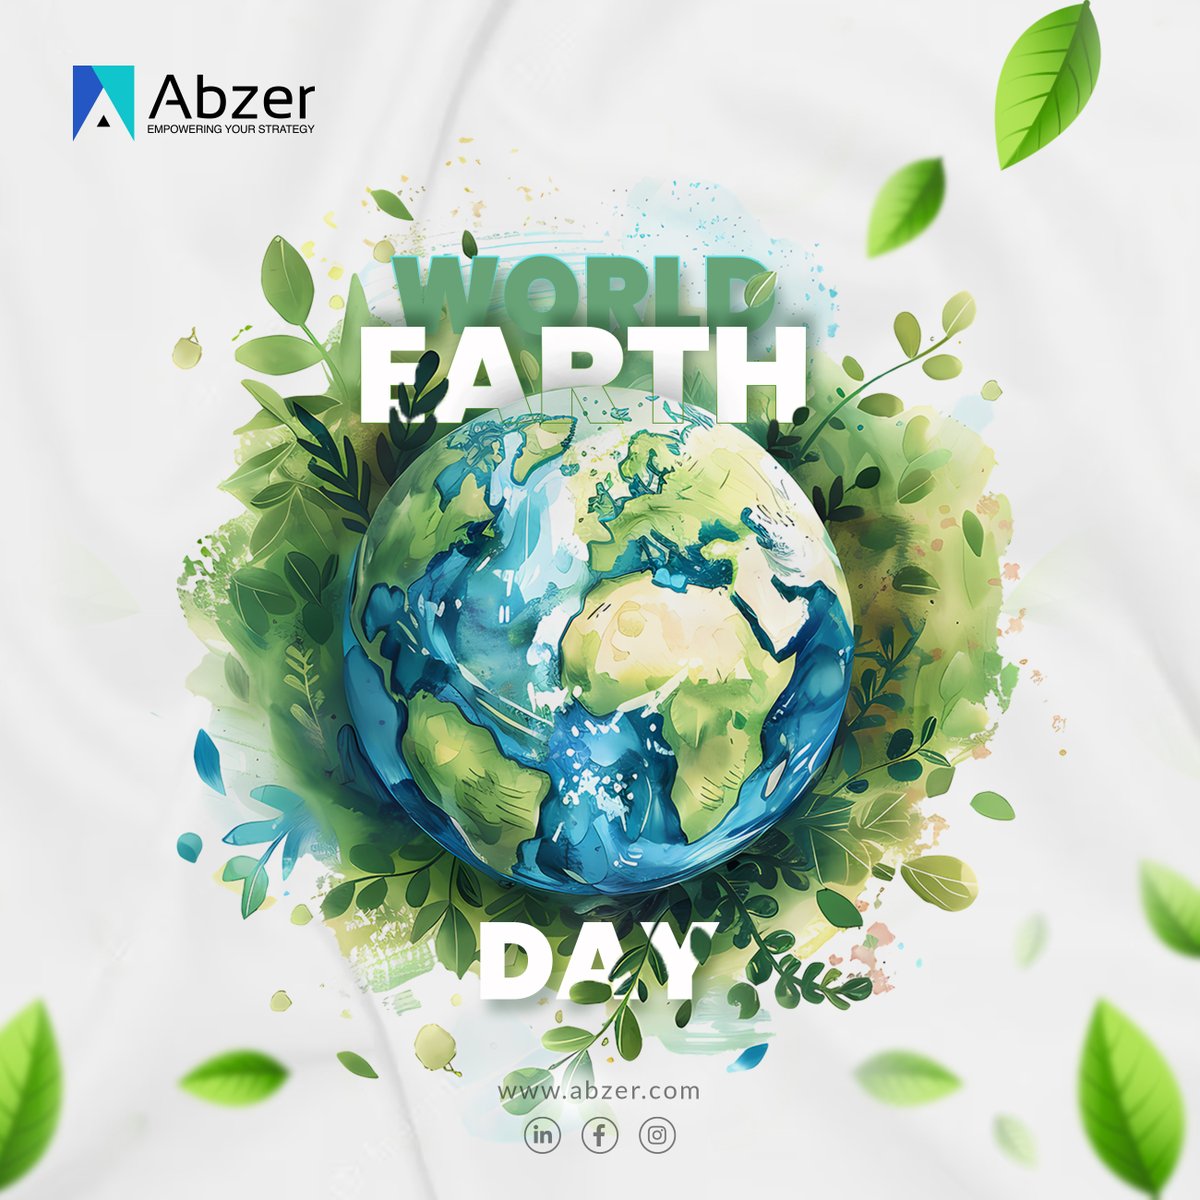 'The Earth has music for those who listen.' - George Santayana.
Happy Earth Day! Let's use today as a reminder to appreciate the beauty of our planet and take action to preserve it for future generations. 
#Earthday #Earthday2024 #Abzerdmcc